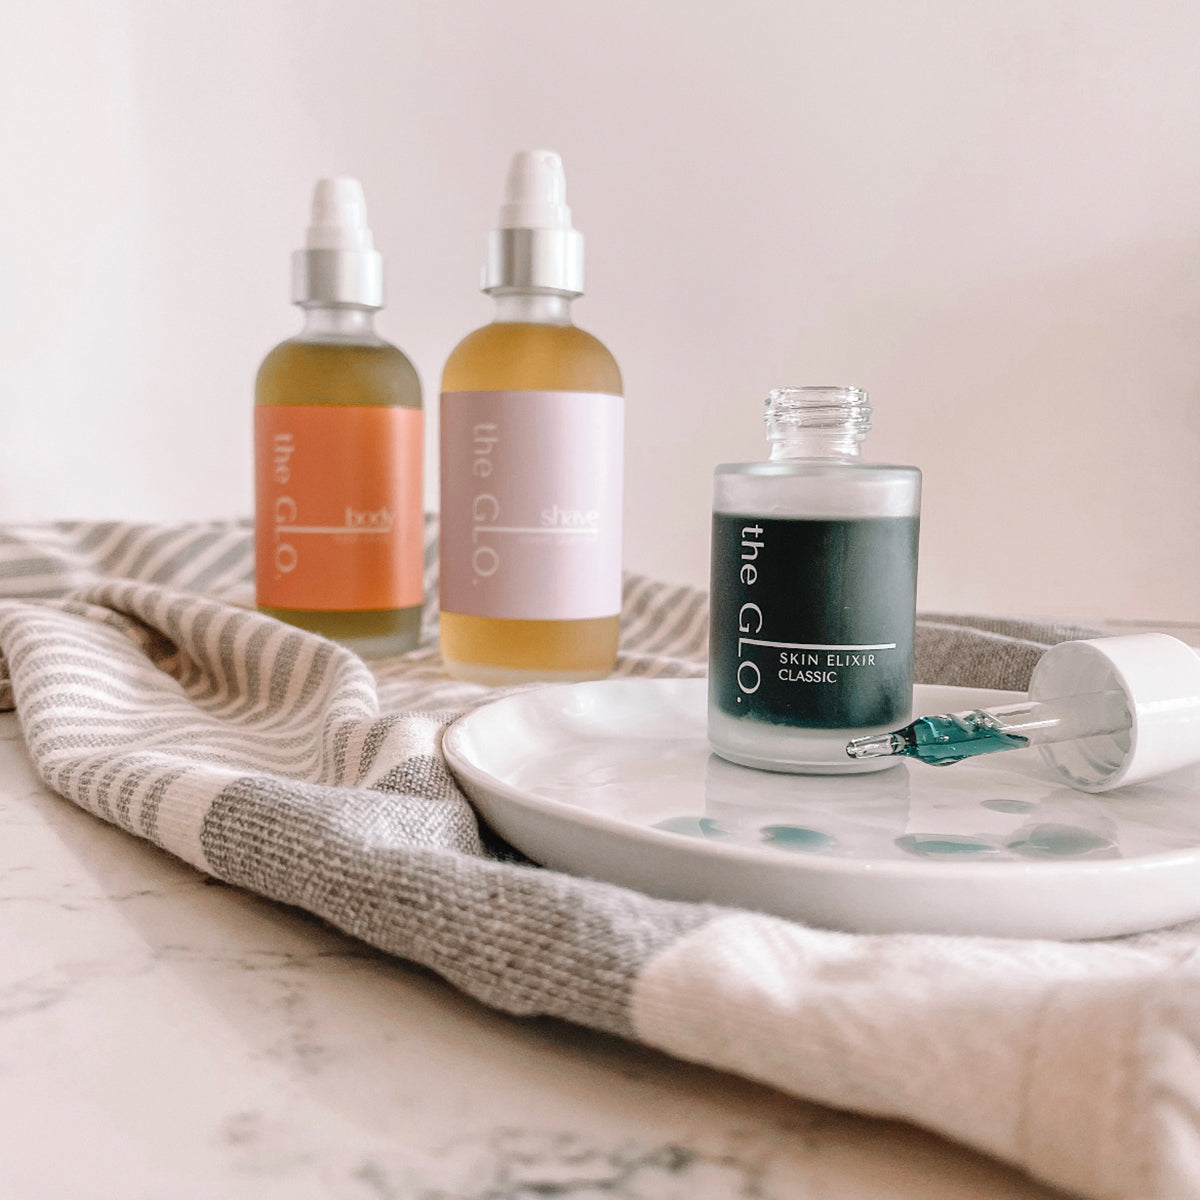 the glo: the magic behind the skin care line - aromatherapy, Blue Tansy, Body Oil, Citrus, Cruelty Free, Elixir, Essential Oils, Lavender, Leaping Bunny, local, Natural, Shave Serum, Skin Care, Vegan - local - letsbelocal.ca